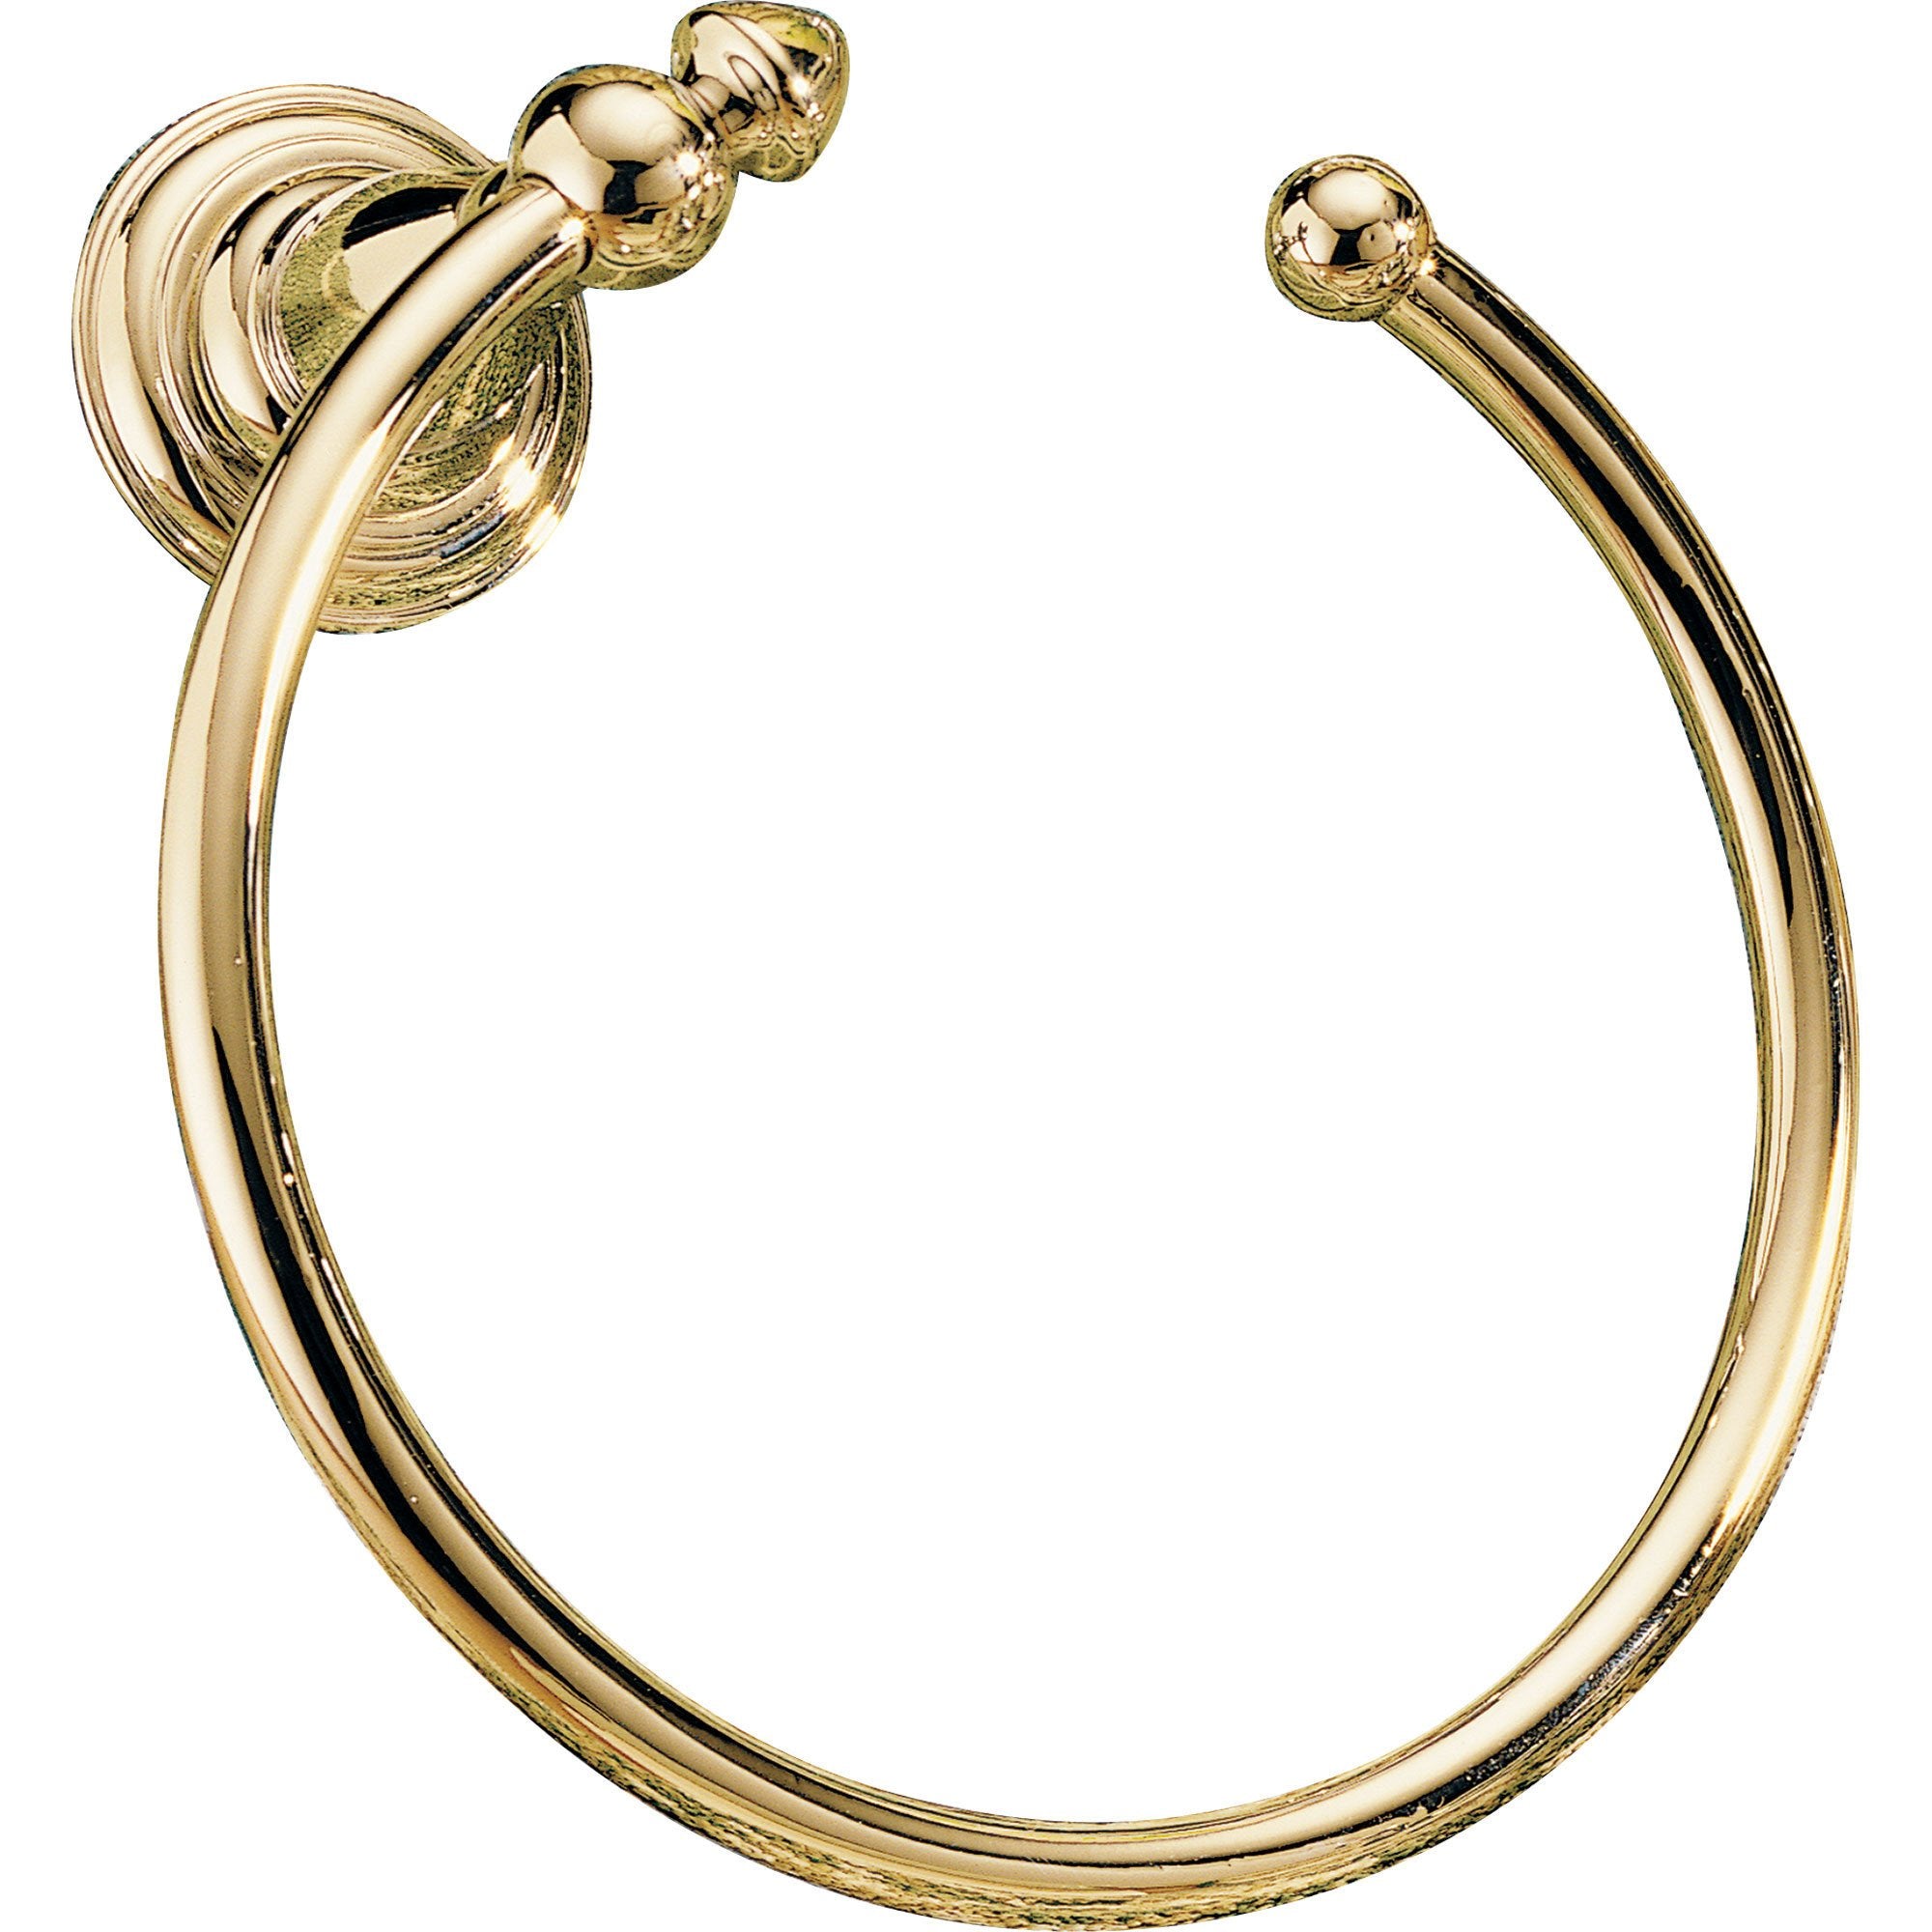 Delta Victorian Polished Brass Hand Towel Ring 387449